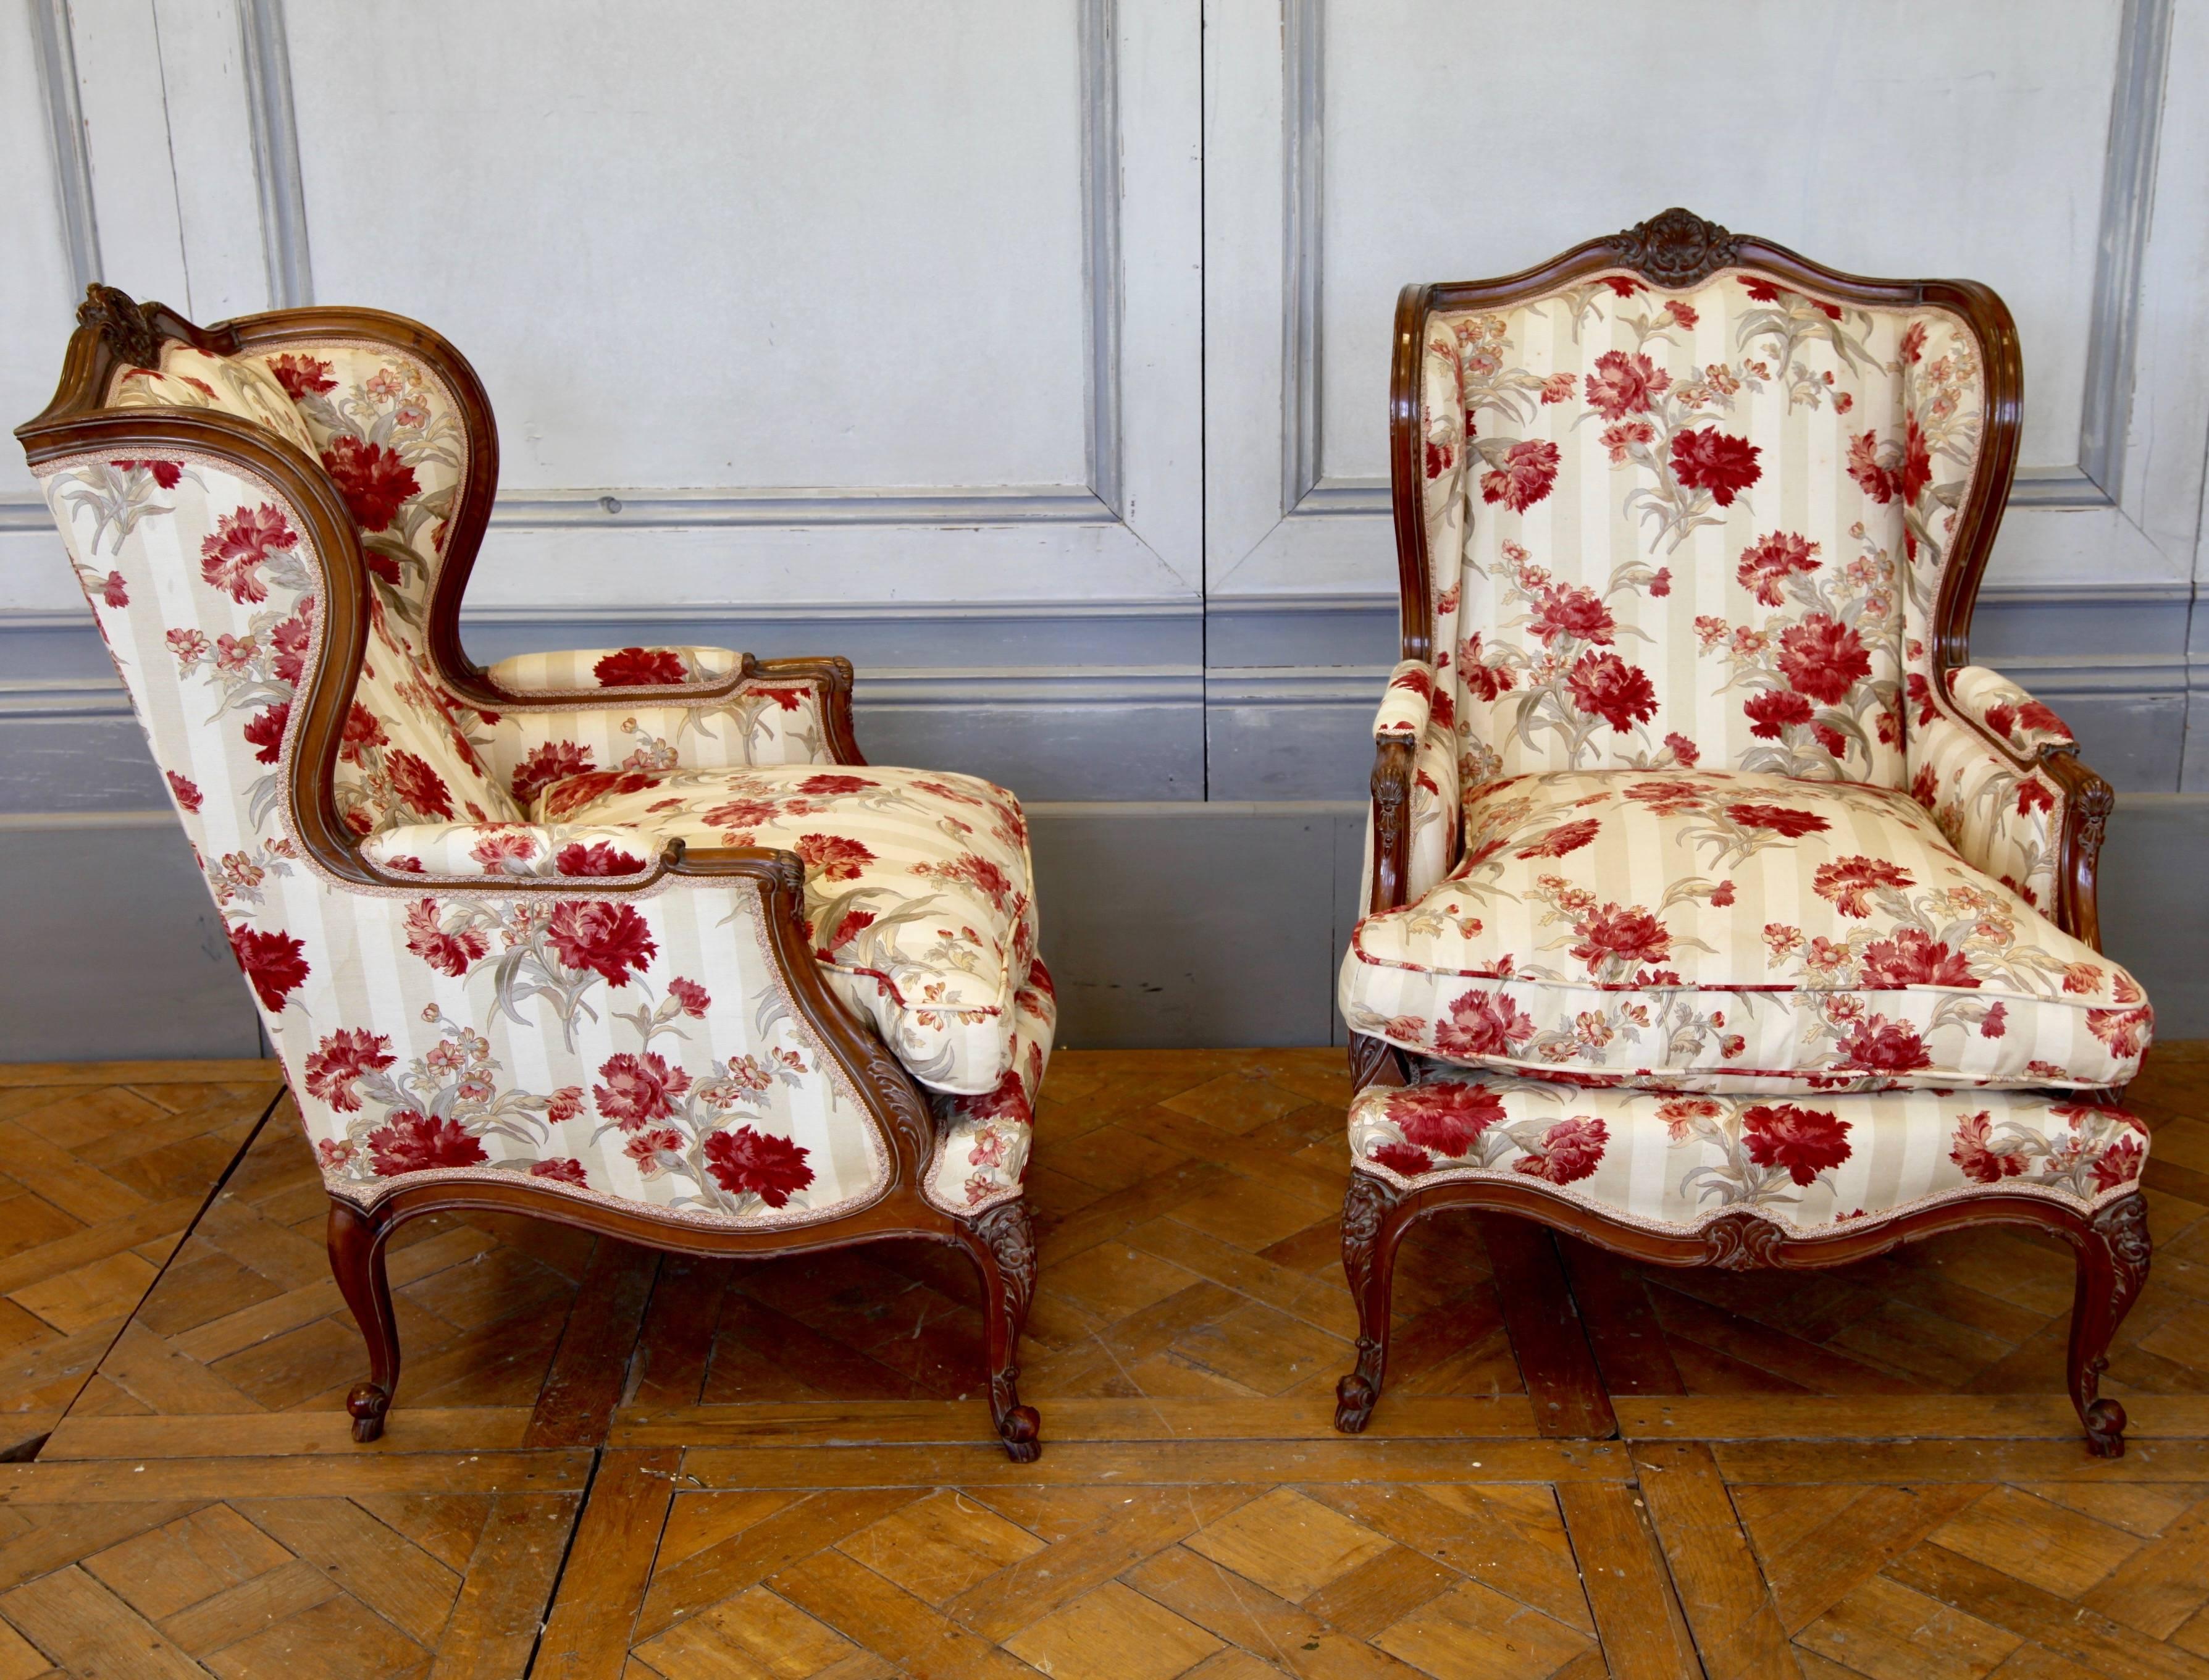 A charming pair of French antique Louis XV style bergere chairs from the early 20 century. hand-carved in walnut with scrolls and flourishes. Fully upholstered in a vintage fabric detailing red carnations.